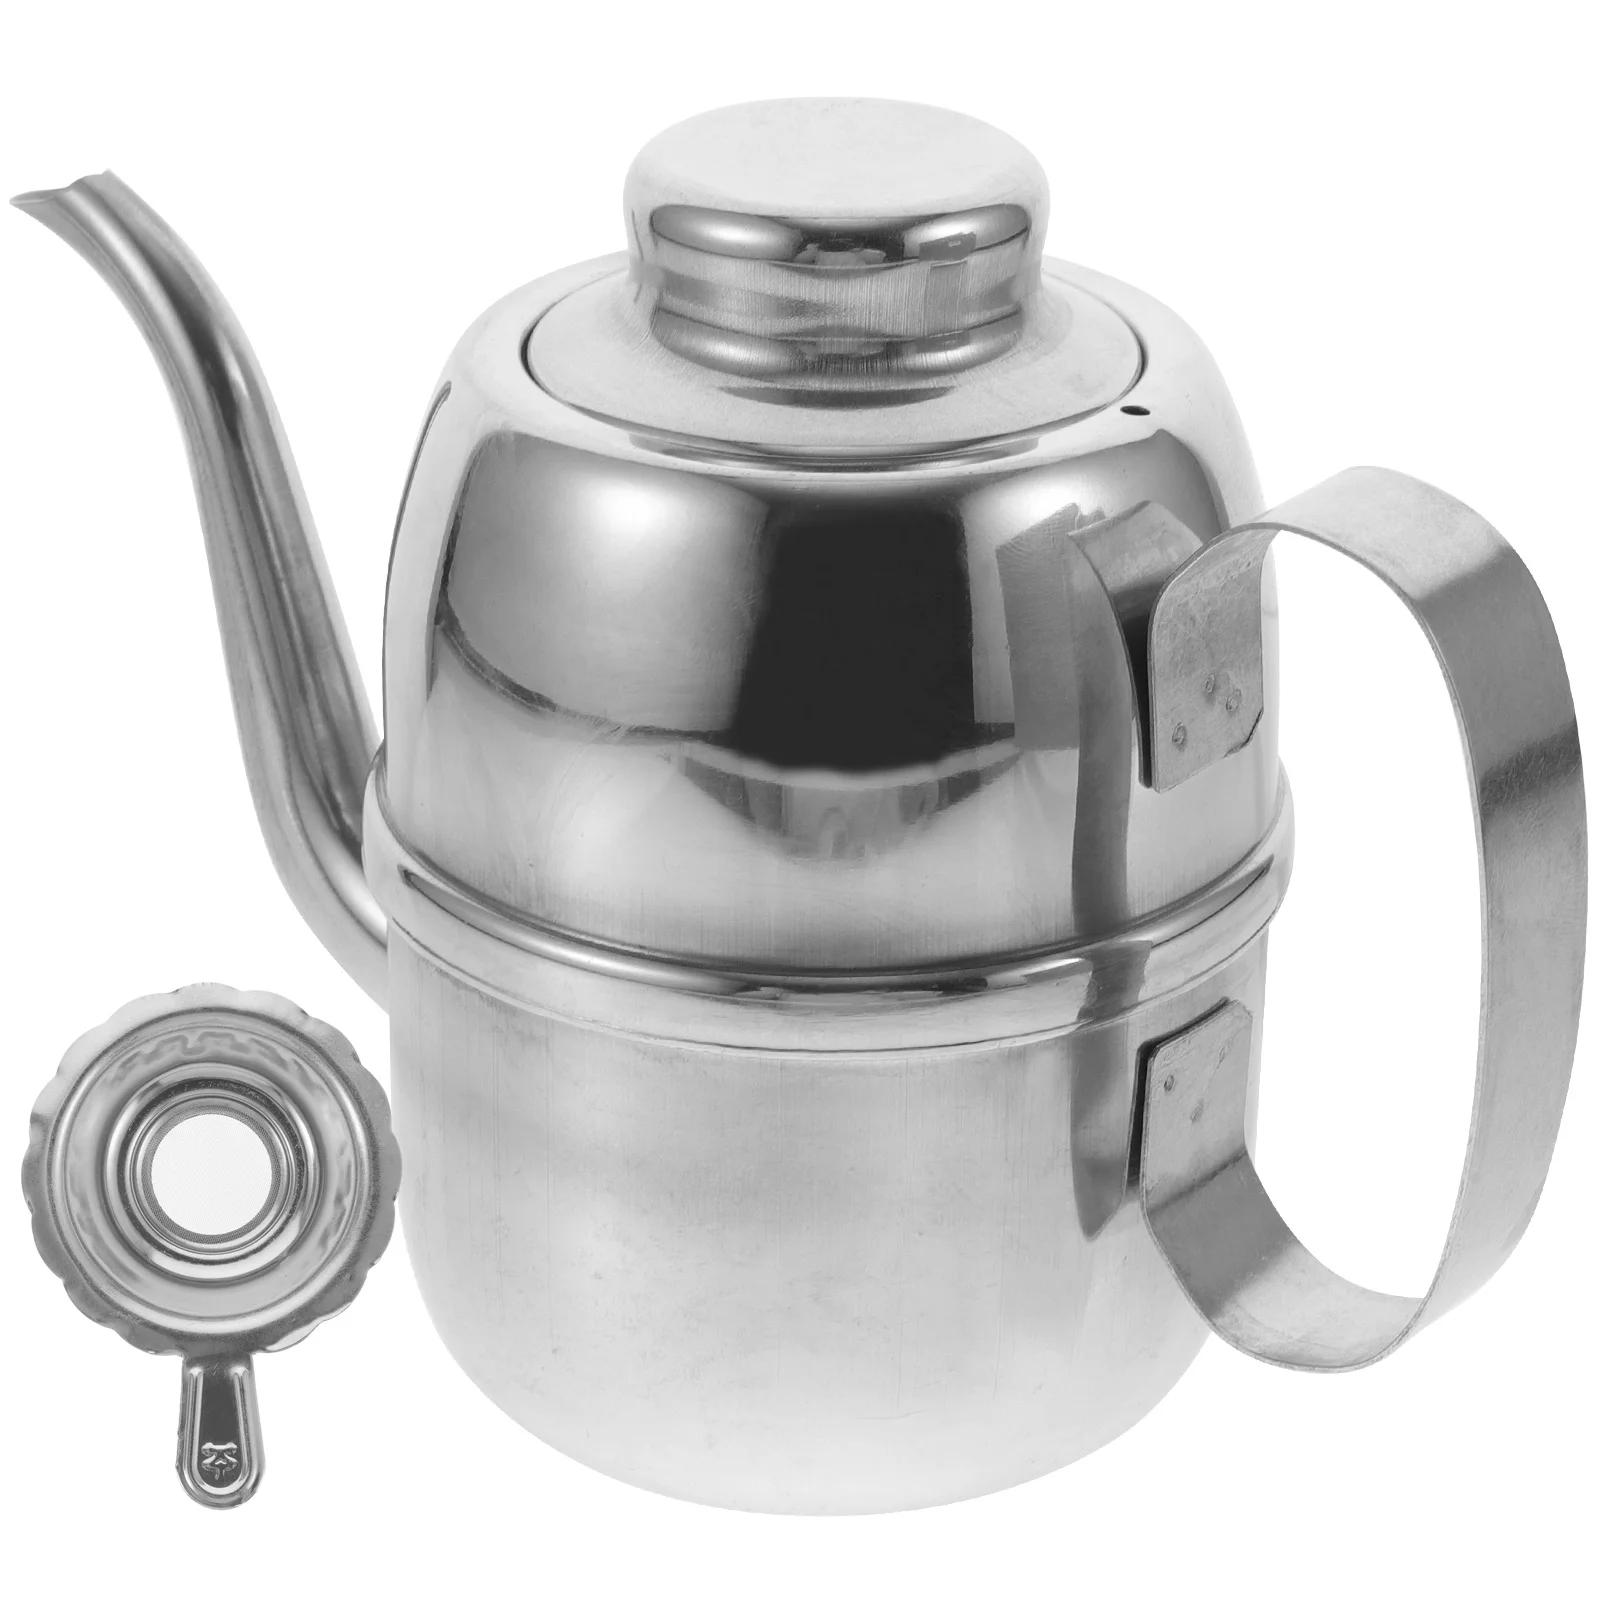 

Stainless Steel Oil Pot Convenient Holder Grease Strainer Soy Sauce Container Filtering Cup Tea Kettle Can Lecythus Food